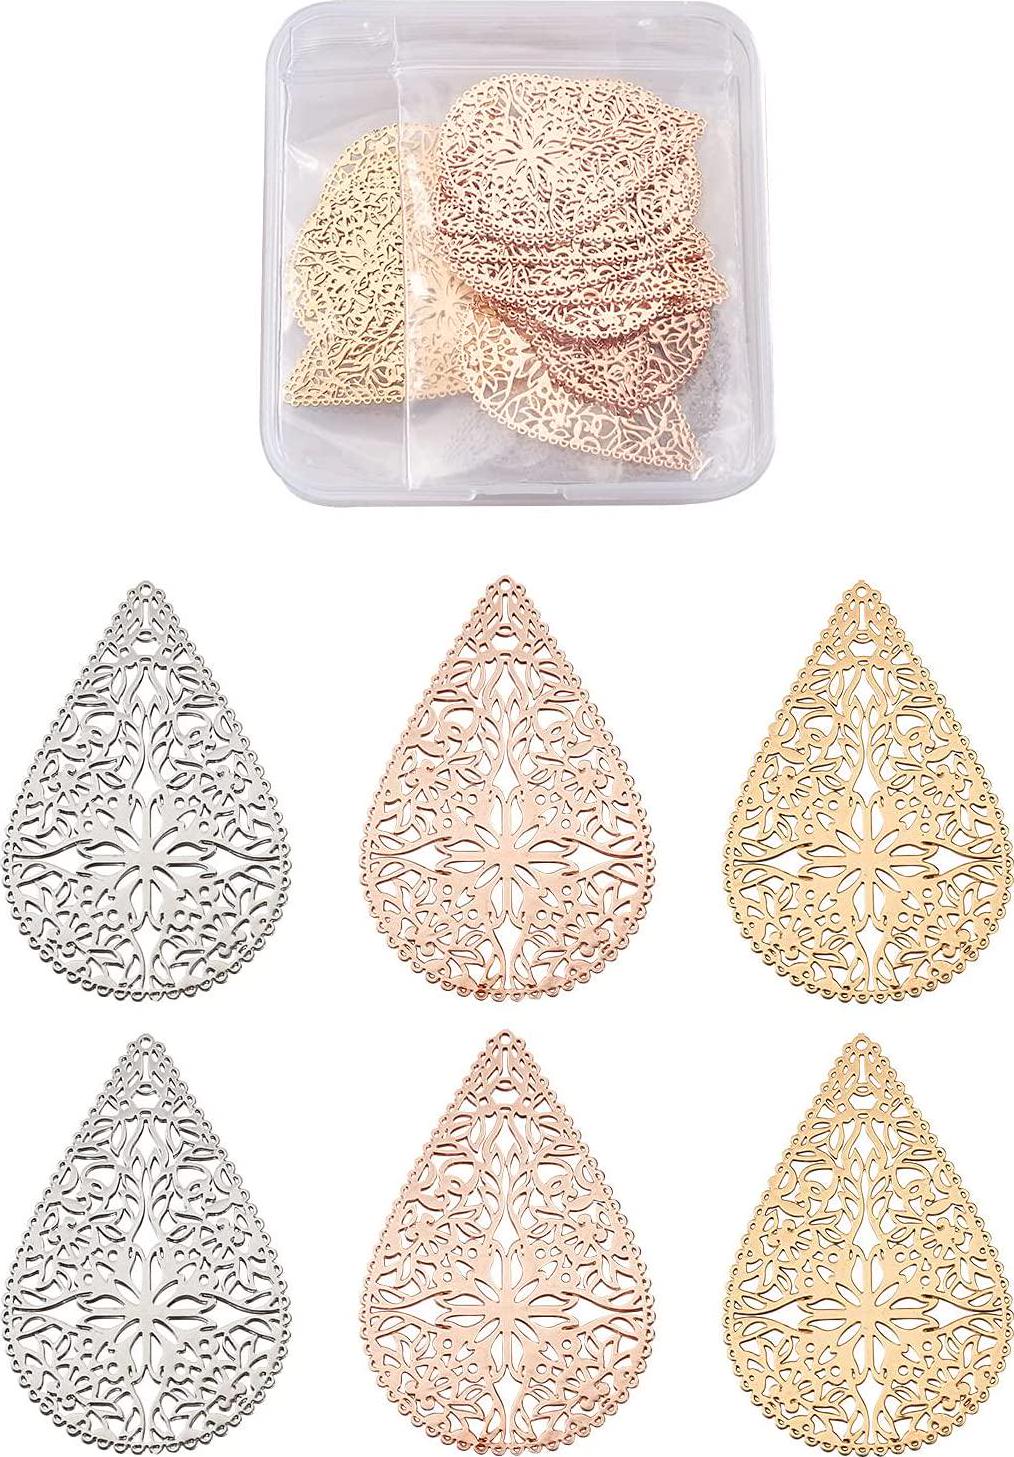 FASHEWELRY, FASHEWELRY 45Pcs Brass Teardrop Filigree Connector Charms 3 Colors Filigree Joiners Links Etched Metal Embellishments for DIY Earring Necklace Jewelry Making